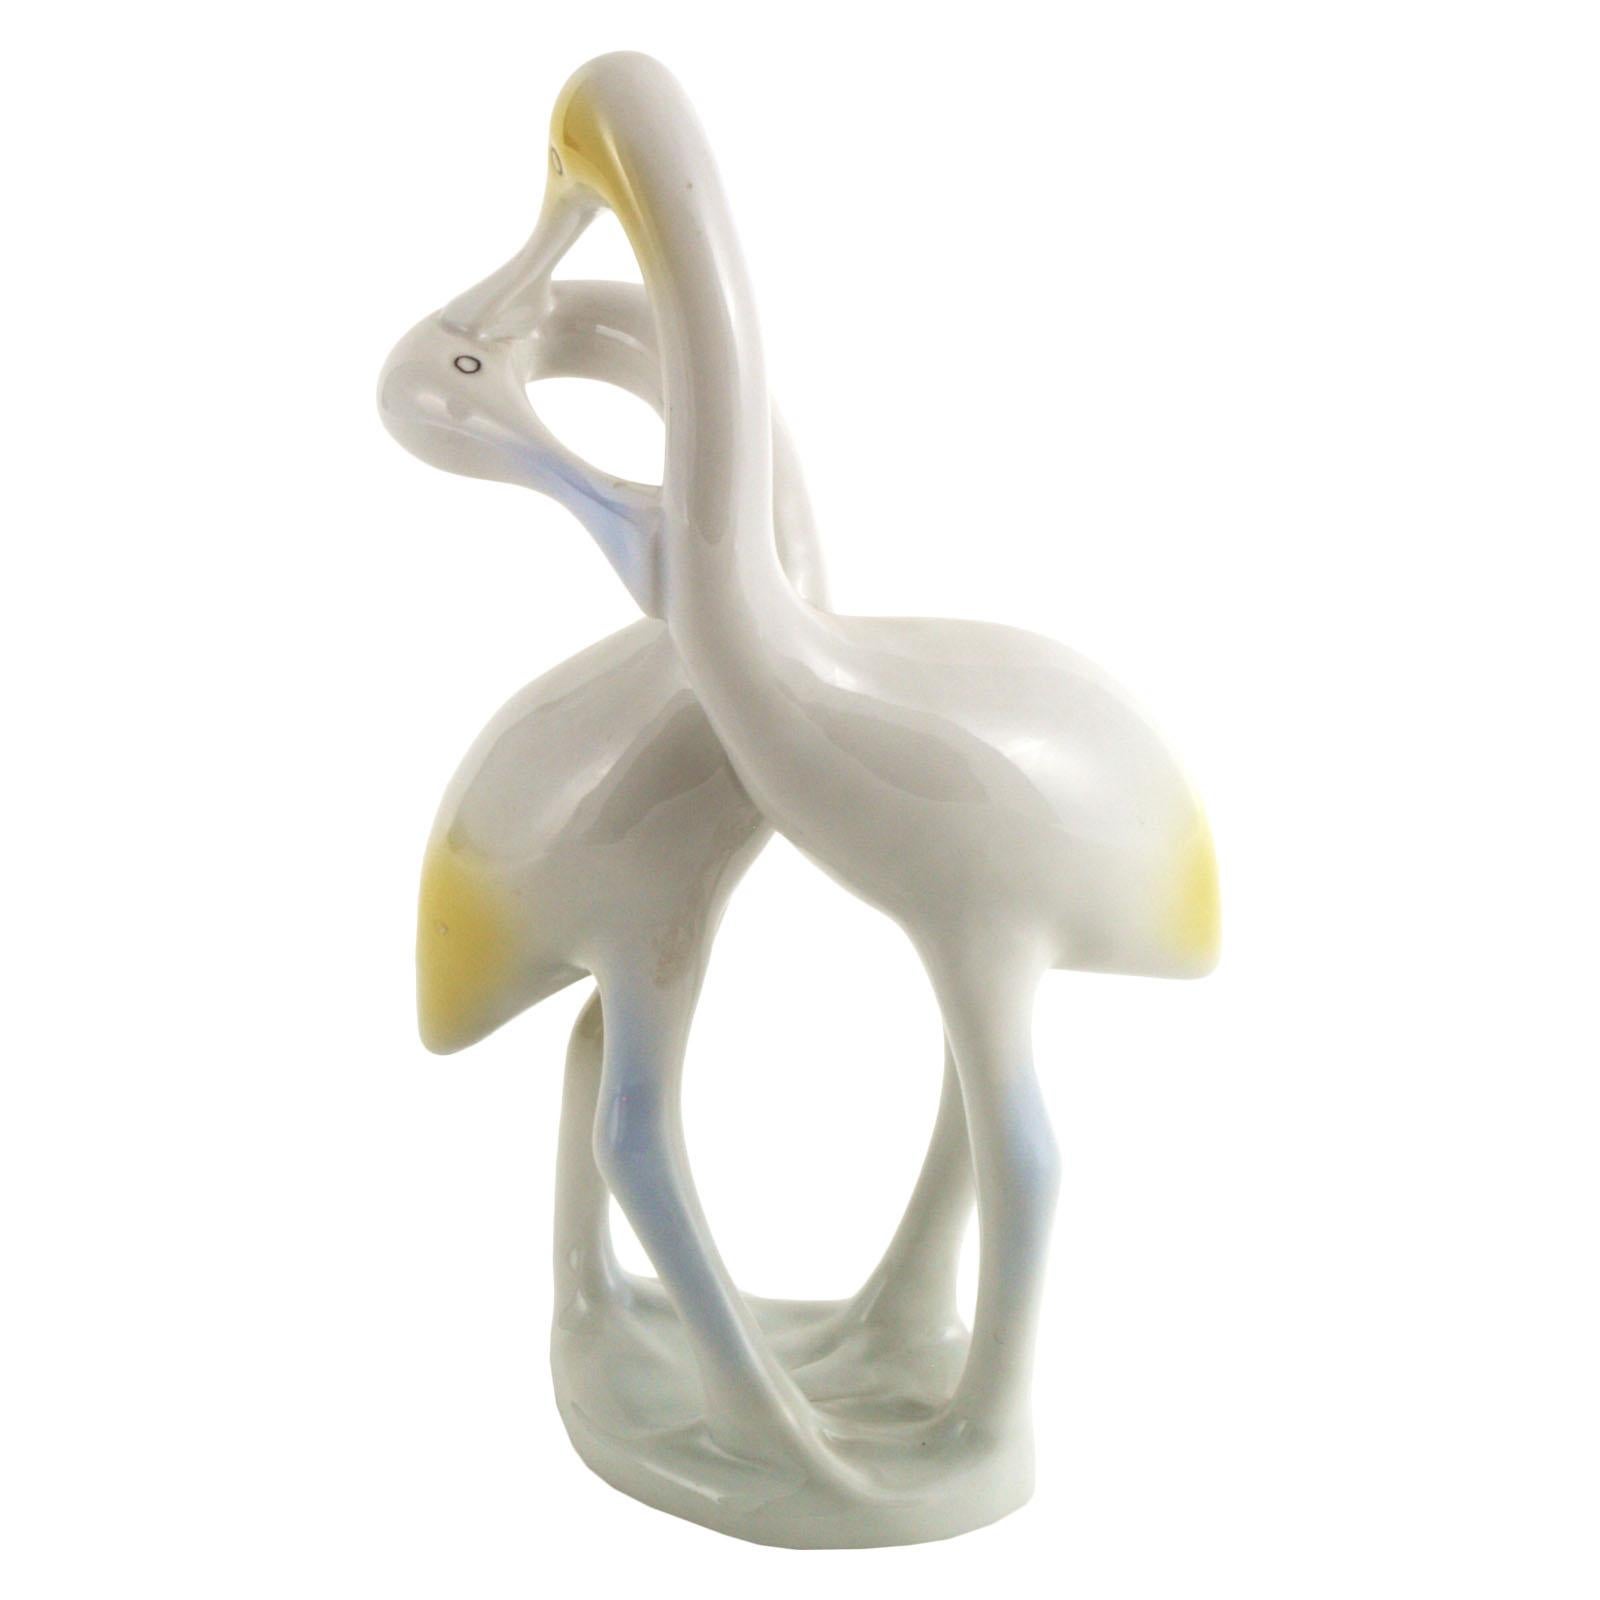 Age Art Deco Hungarian porcelain figurine depicting swans couple by Holloaza, in excellent conditions, signed


About Holloaza
Hollohaza porcelain is one of the oldest porcelain manufactory in Europe and it is the oldest in Hungary, dating back